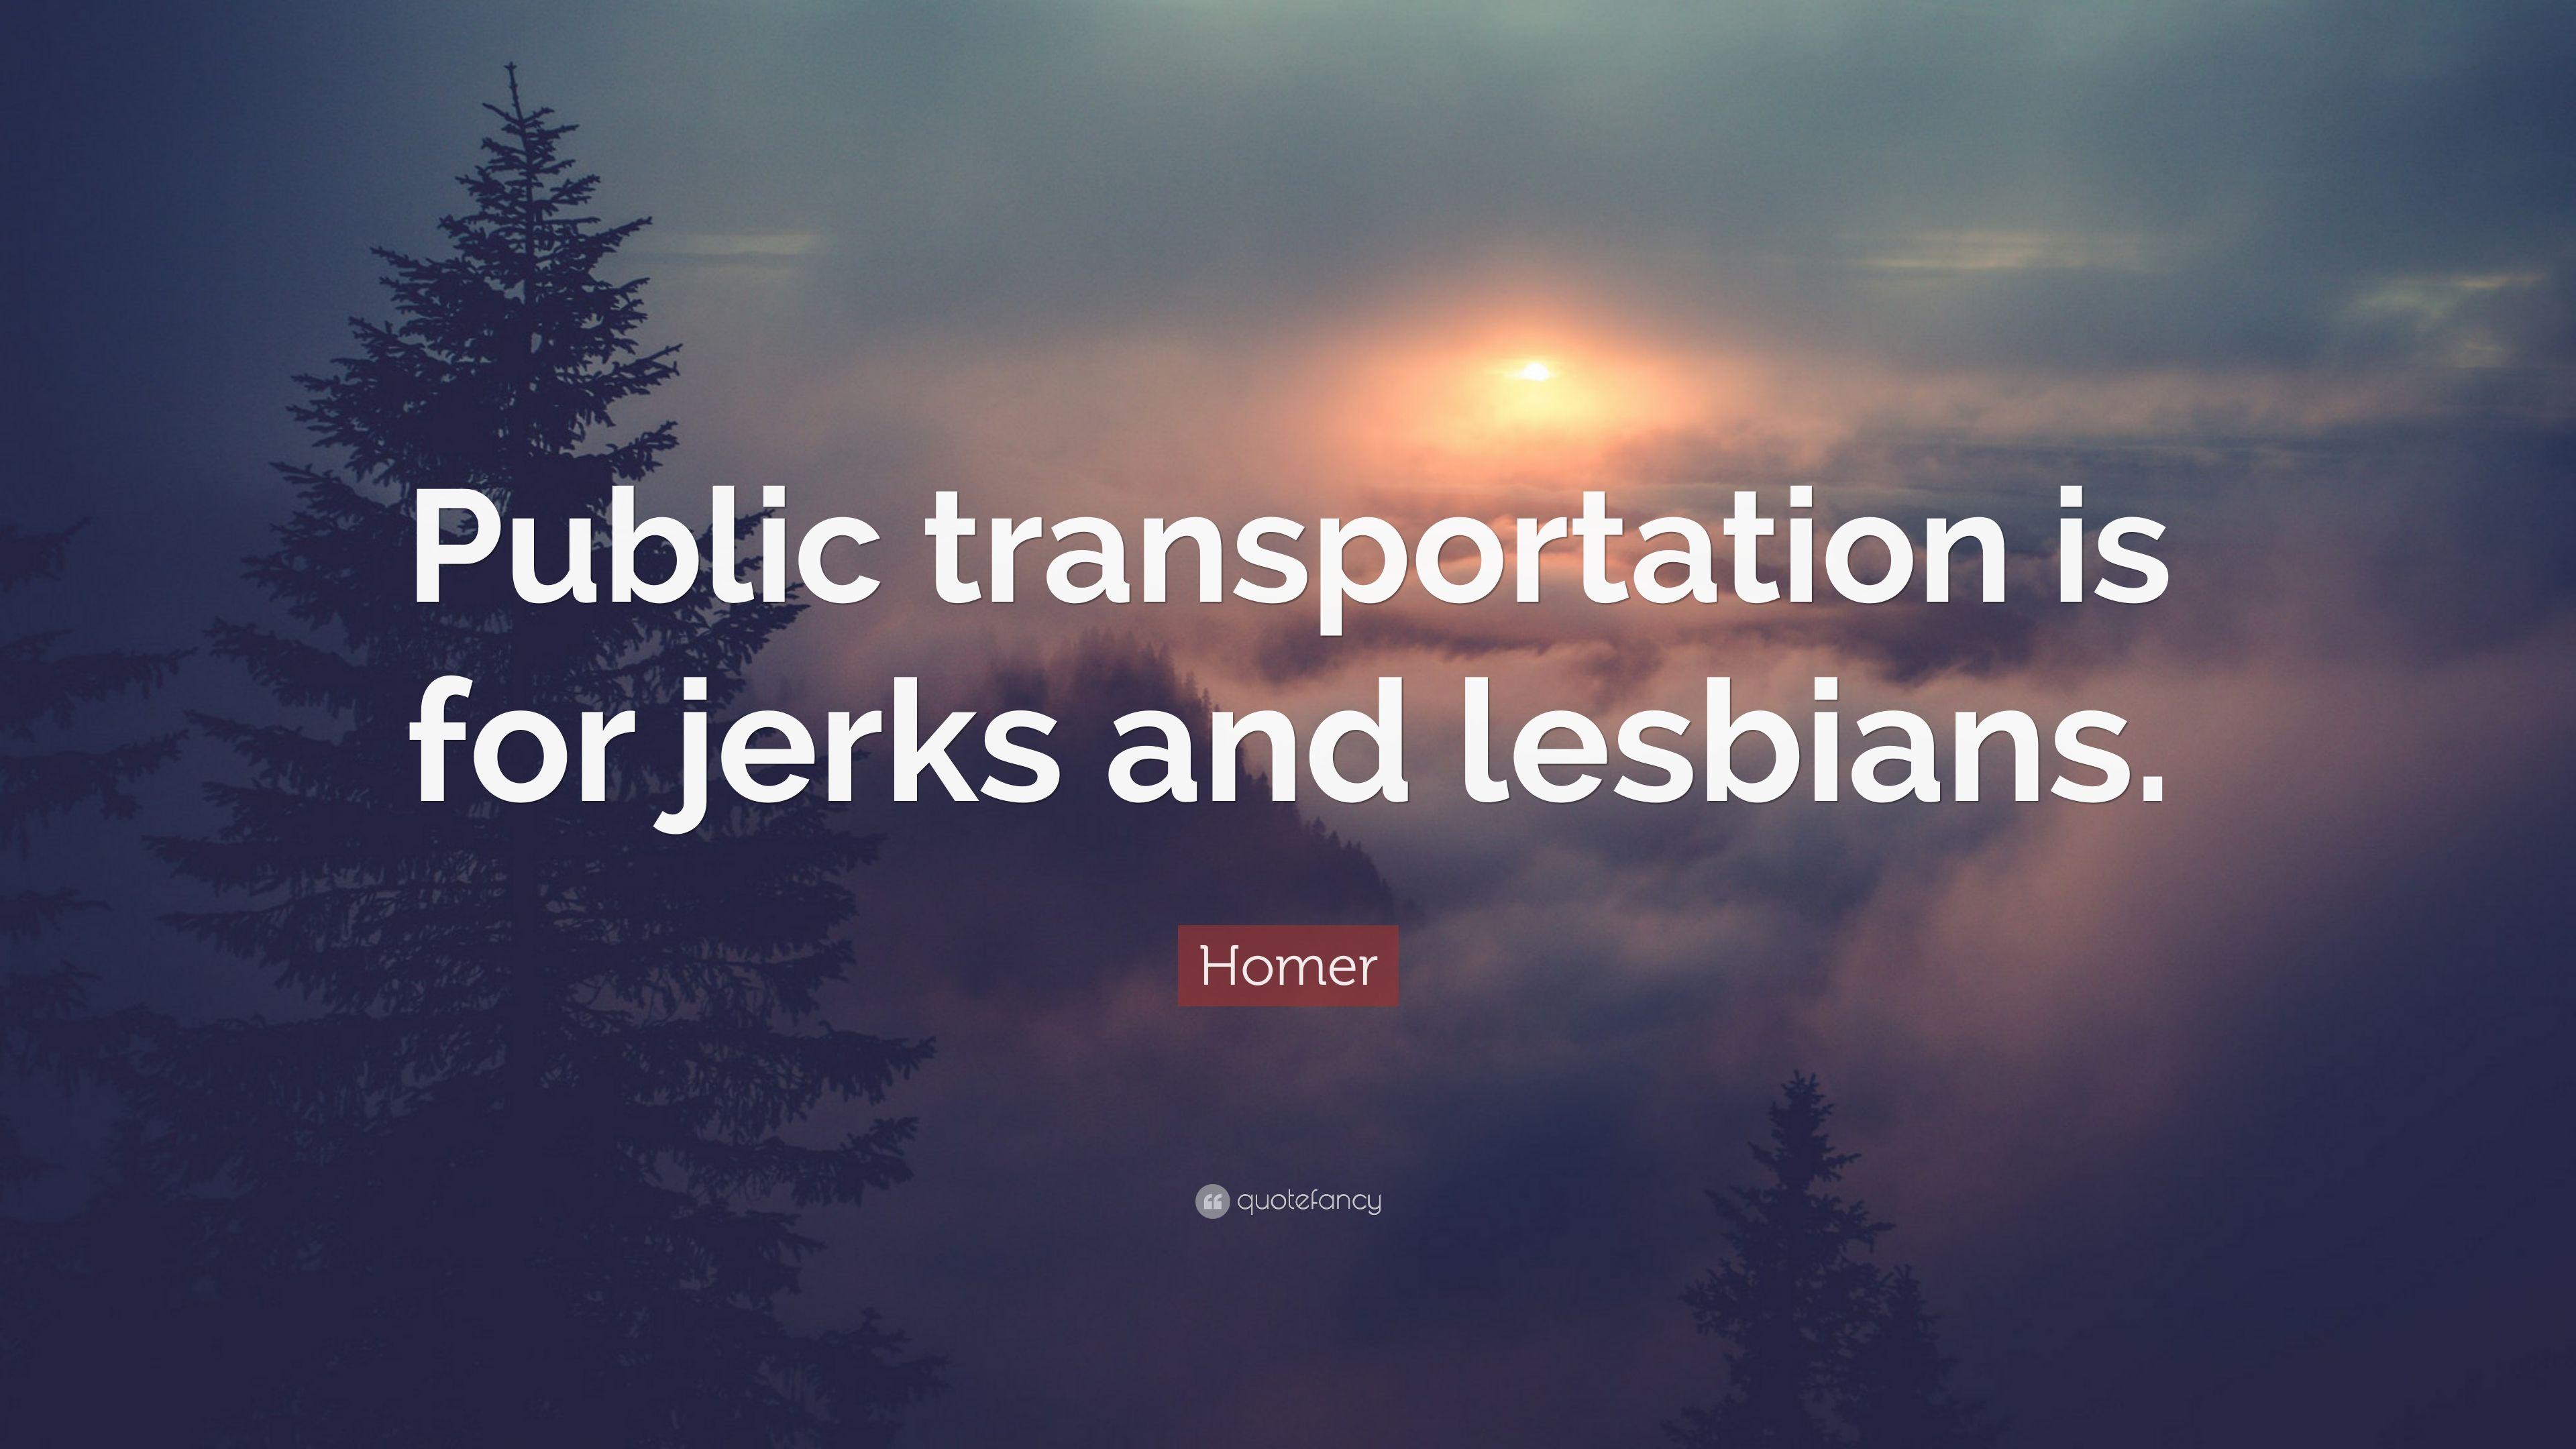 Homer Quote: “Public transportation is for jerks and lesbians.” 7